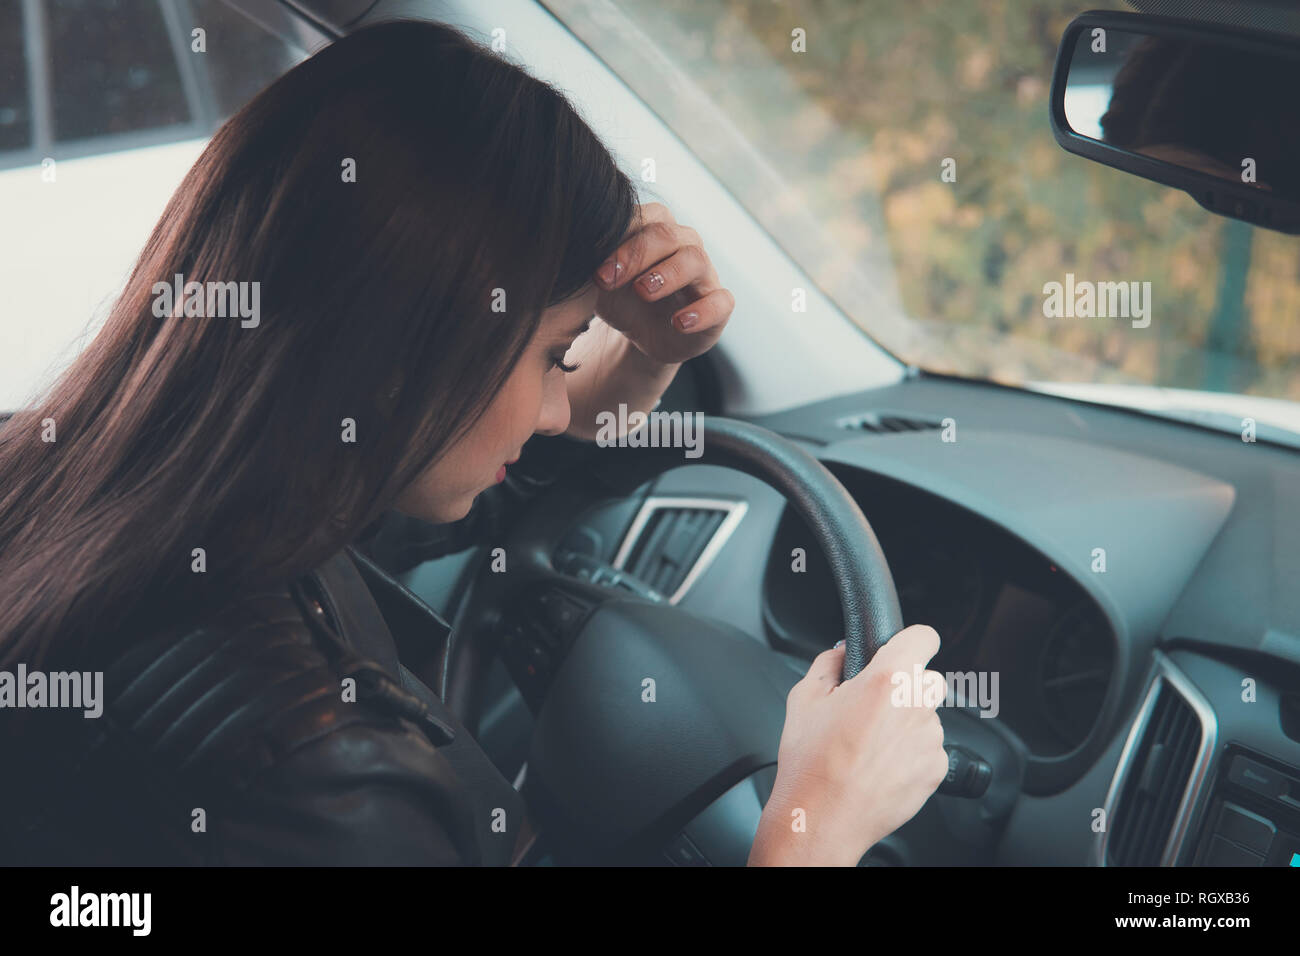 Closeup picture of young pretty lady waiting in car leaning on wheel with eyes closed on outdoors background. Girl feeling sleepy while waiting for so Stock Photo